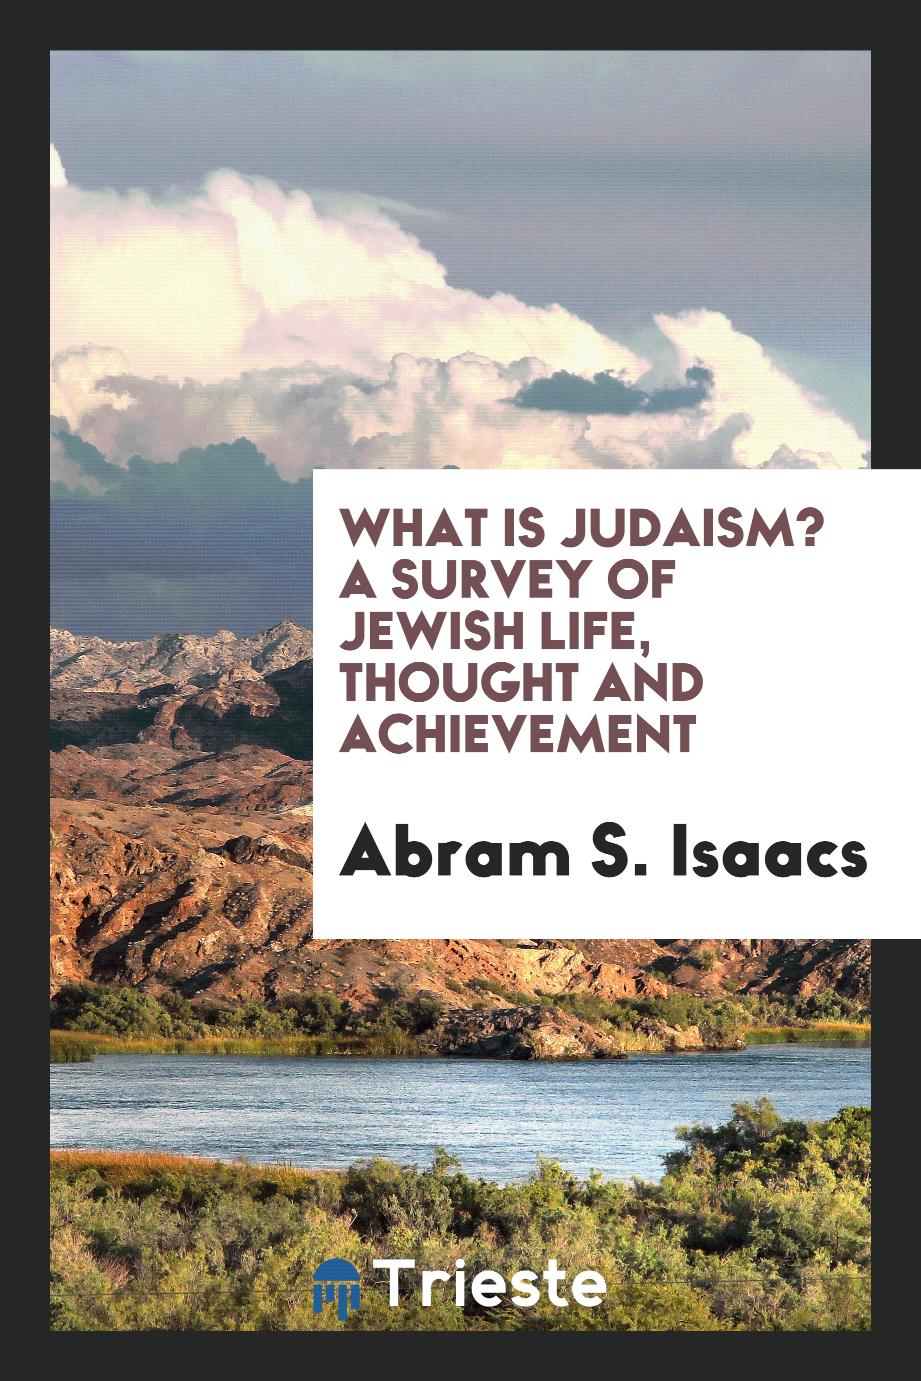 What is Judaism? A survey of Jewish Life, Thought and achievement